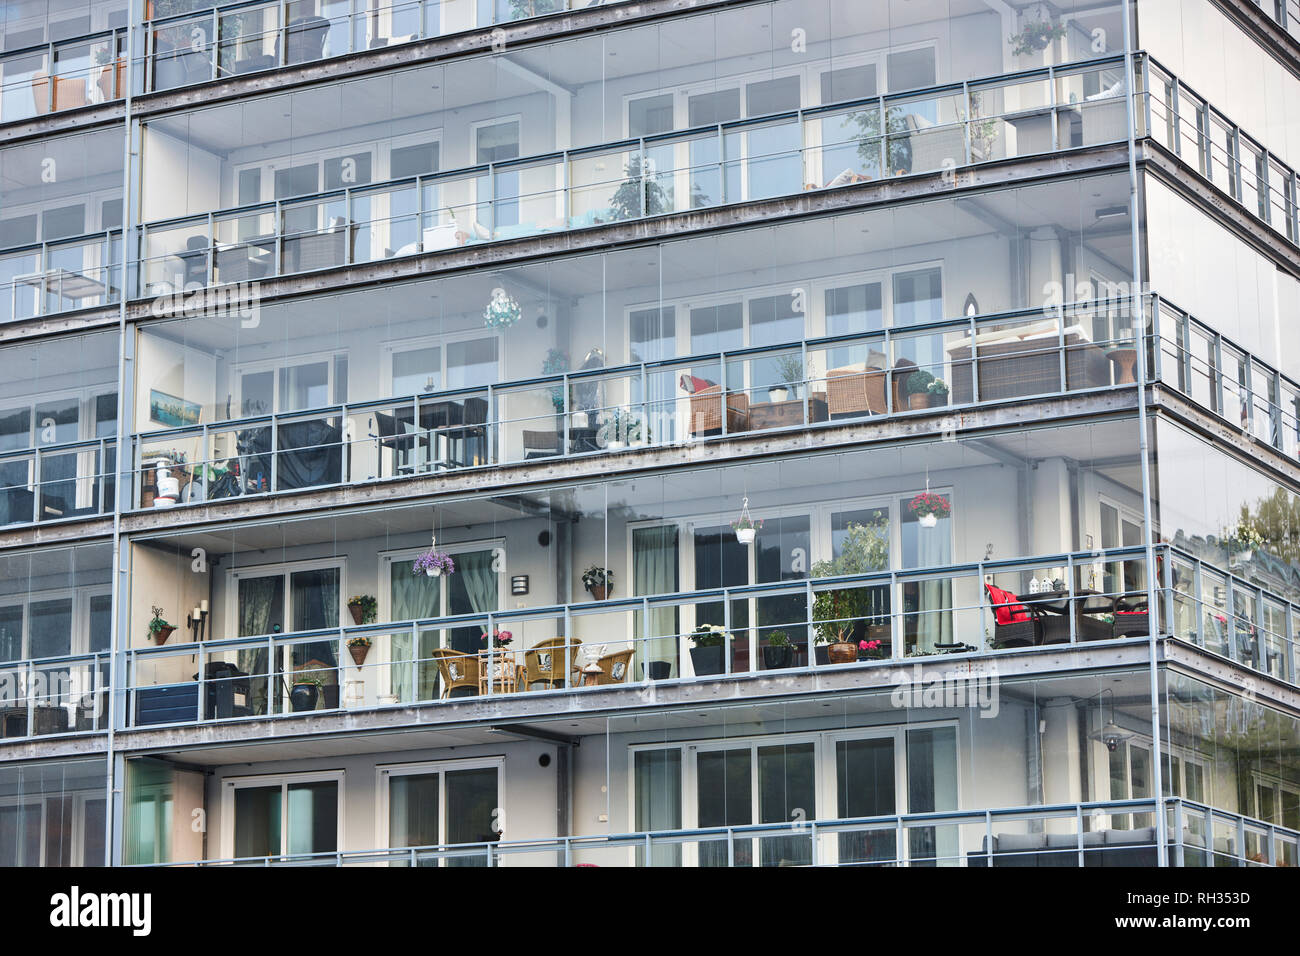 Building with balconies Stock Photo